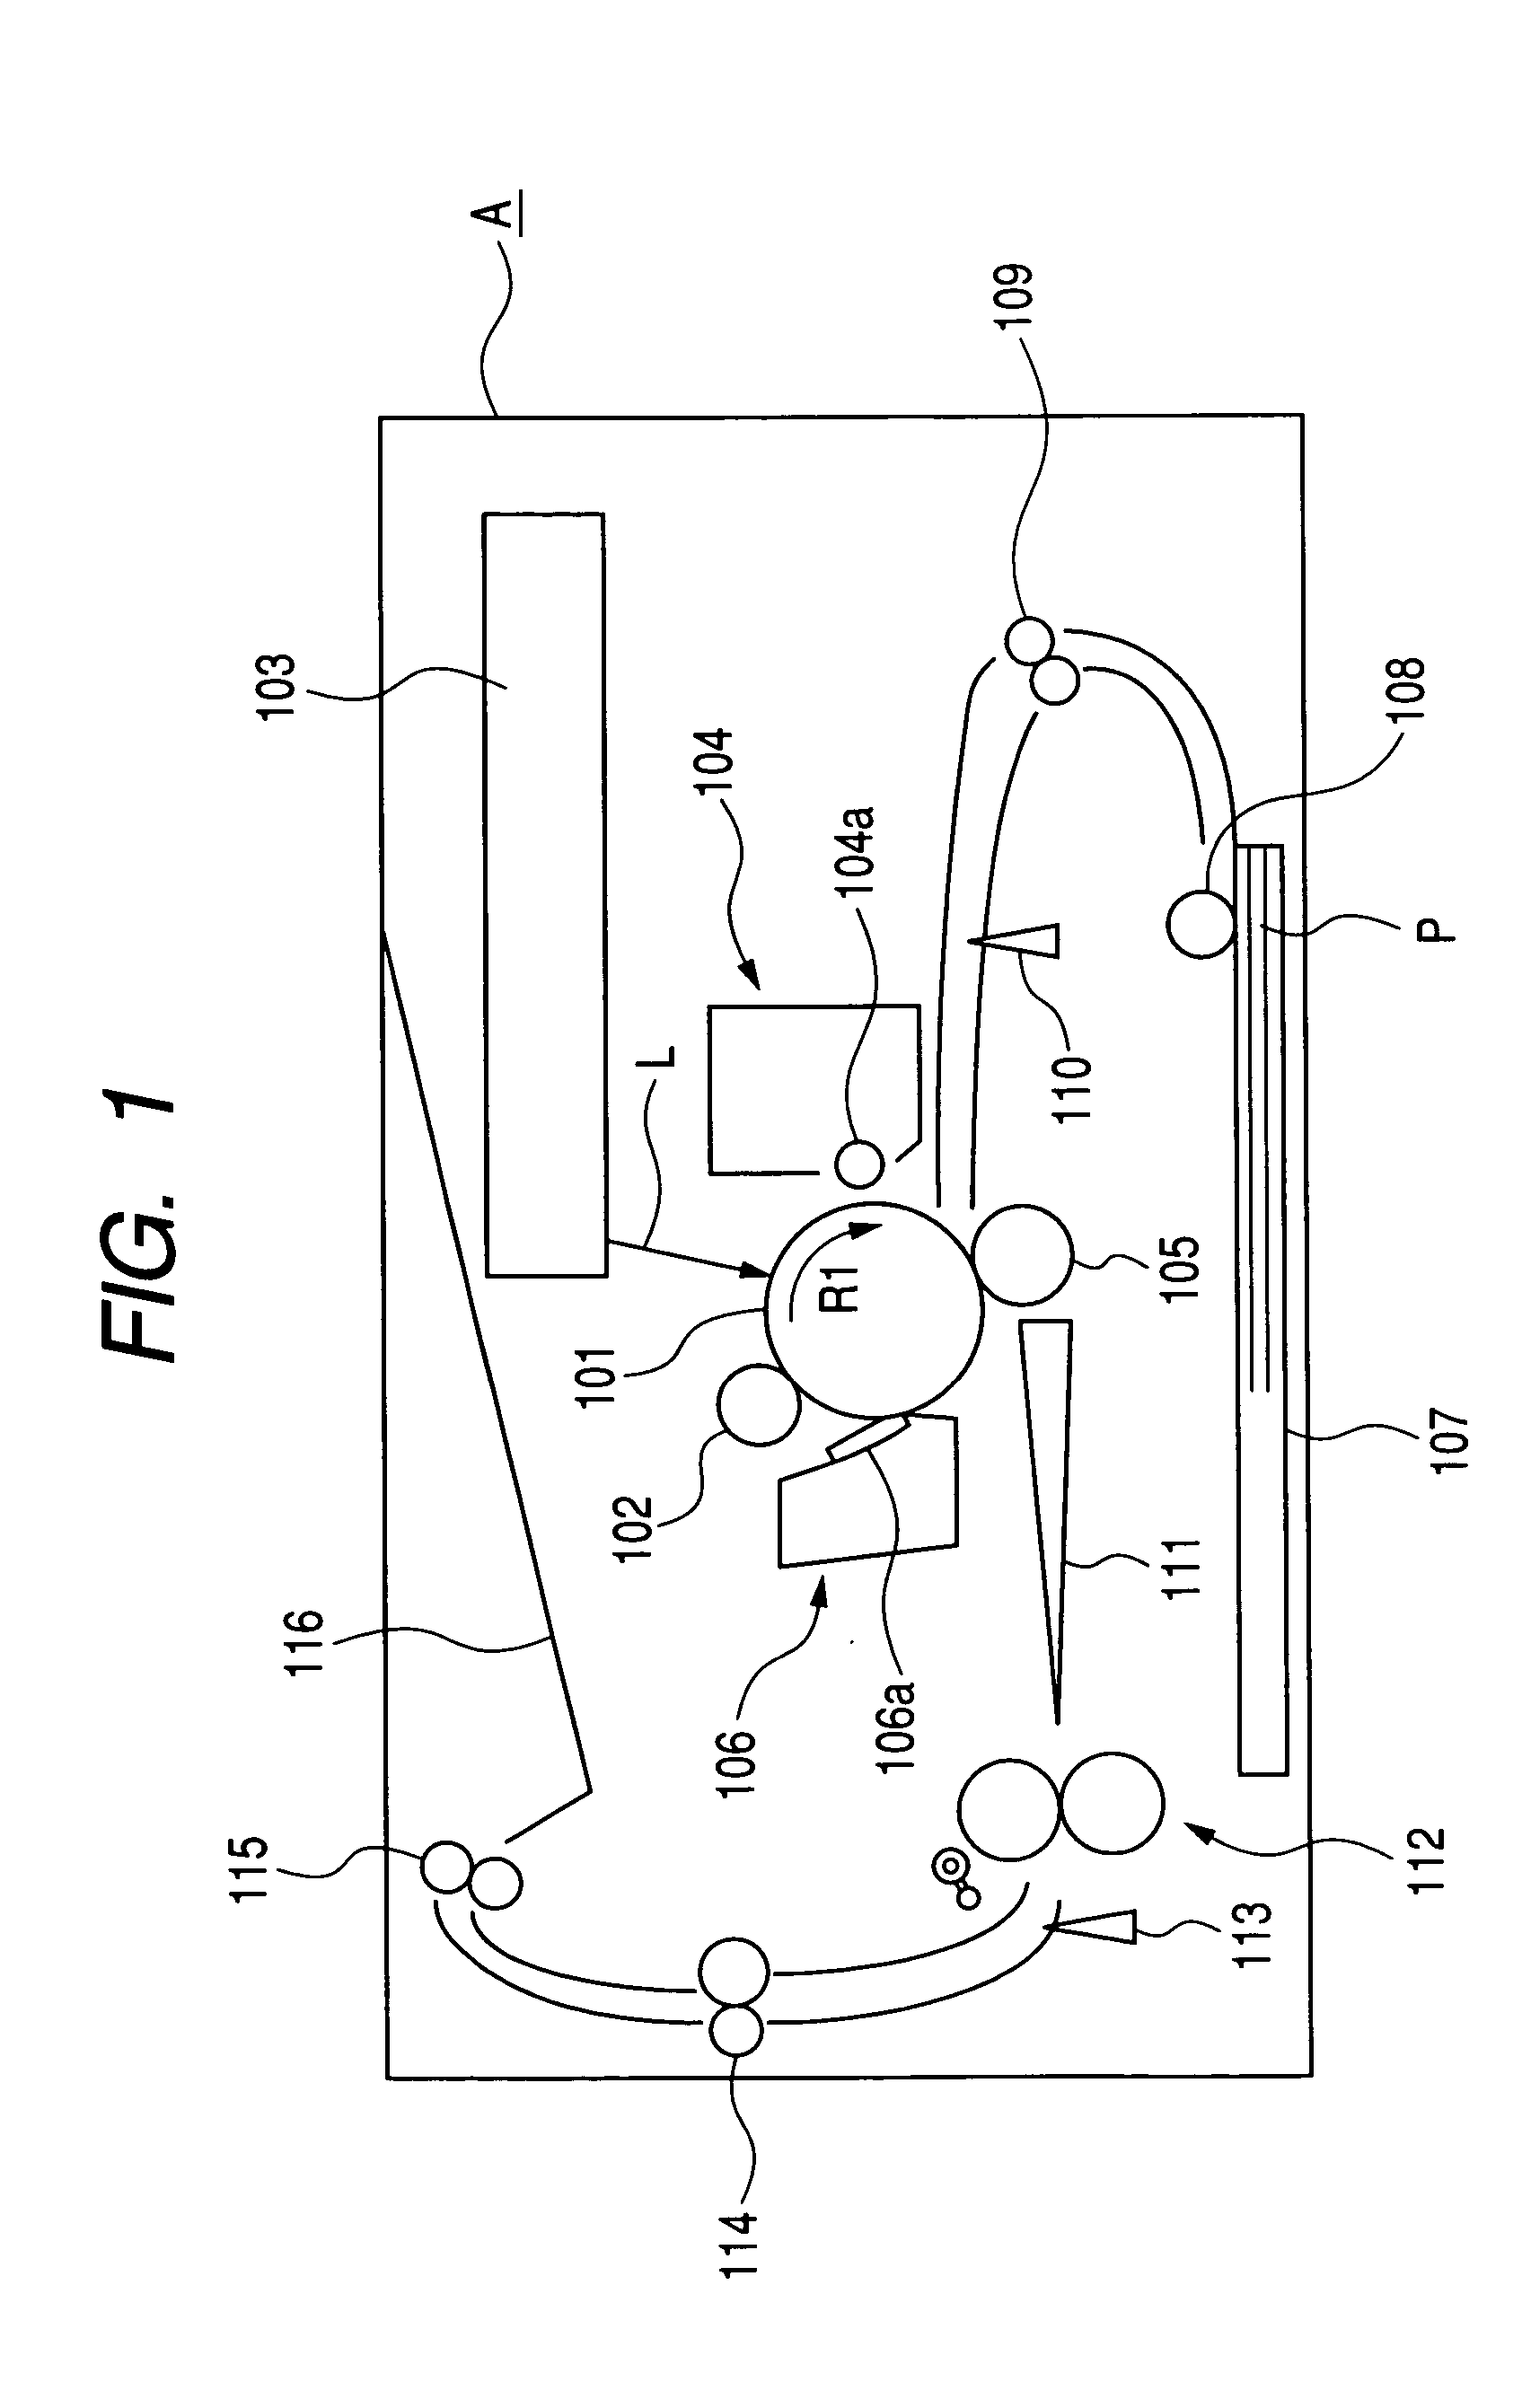 Image fixing apparatus capable of changing surface condition of fixing rotary member and fixing rotary member for use therein